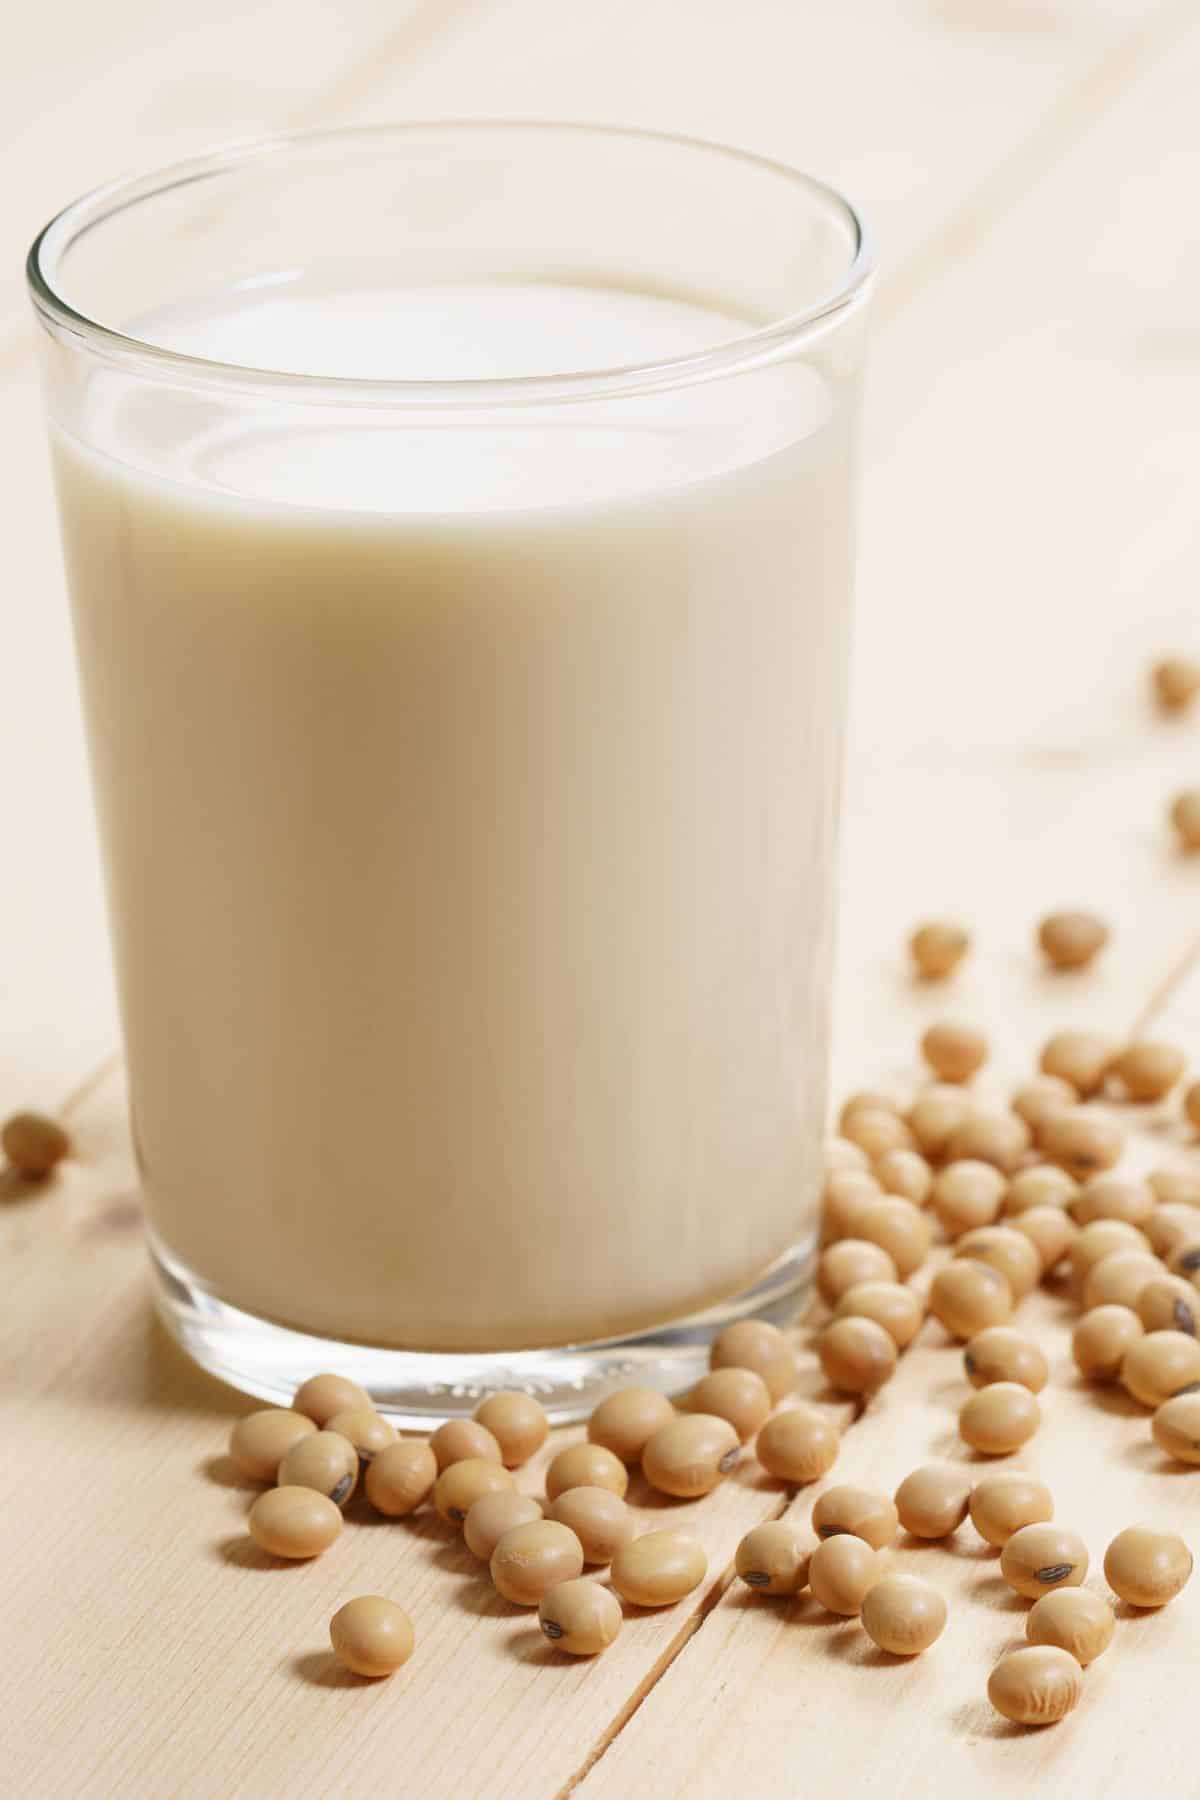 soy milk in a glass surrounded by soy beans.